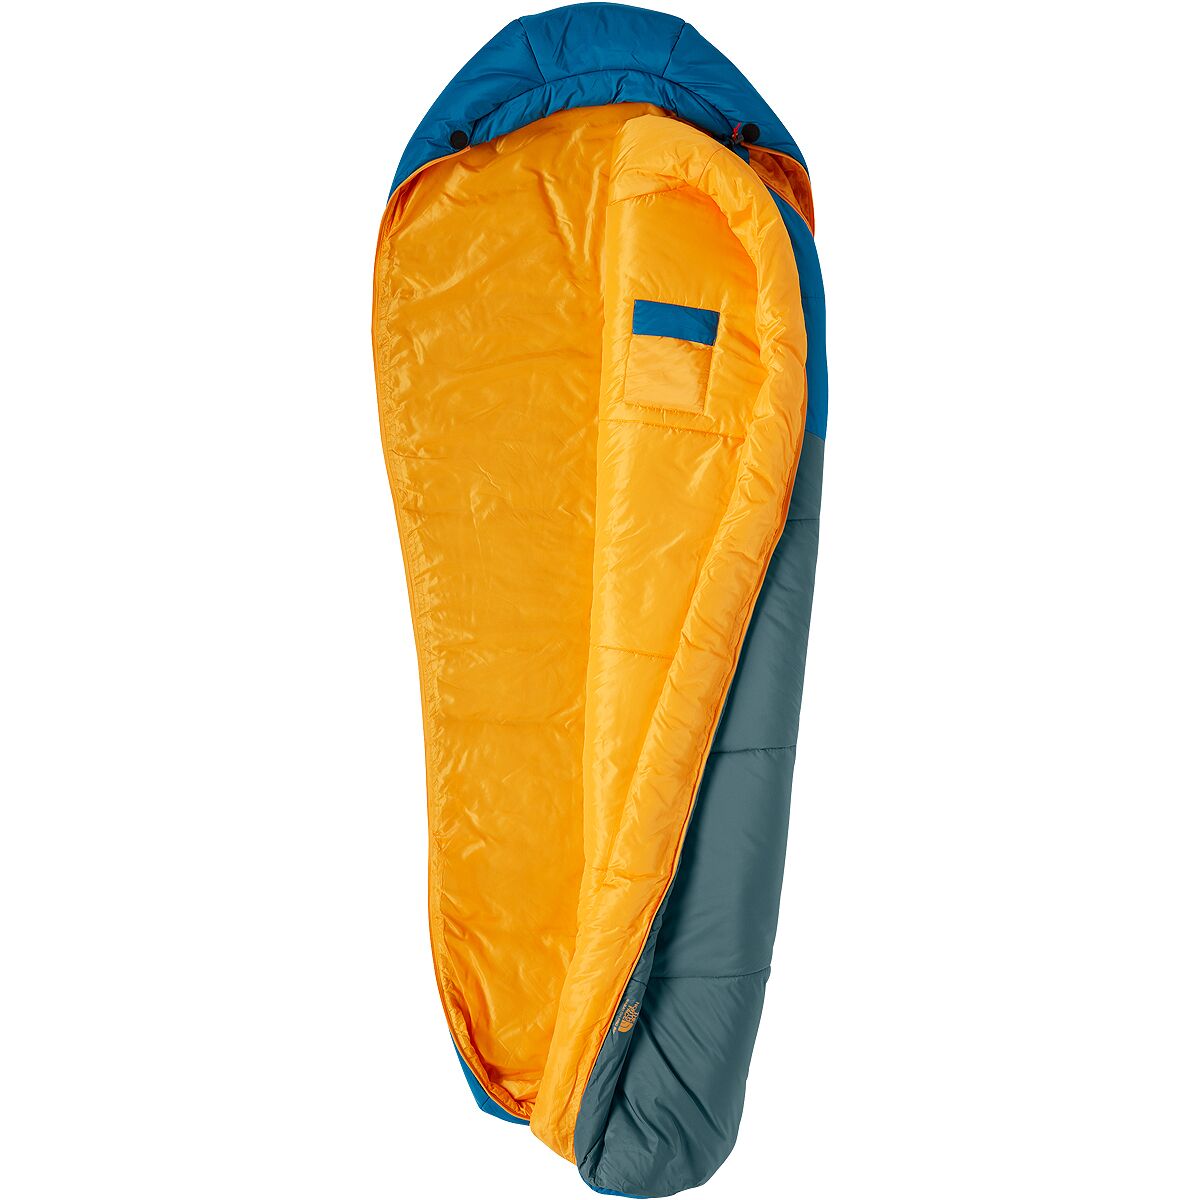 The North Face Wasatch Pro 20 Sleeping Bag: 20F Synthetic